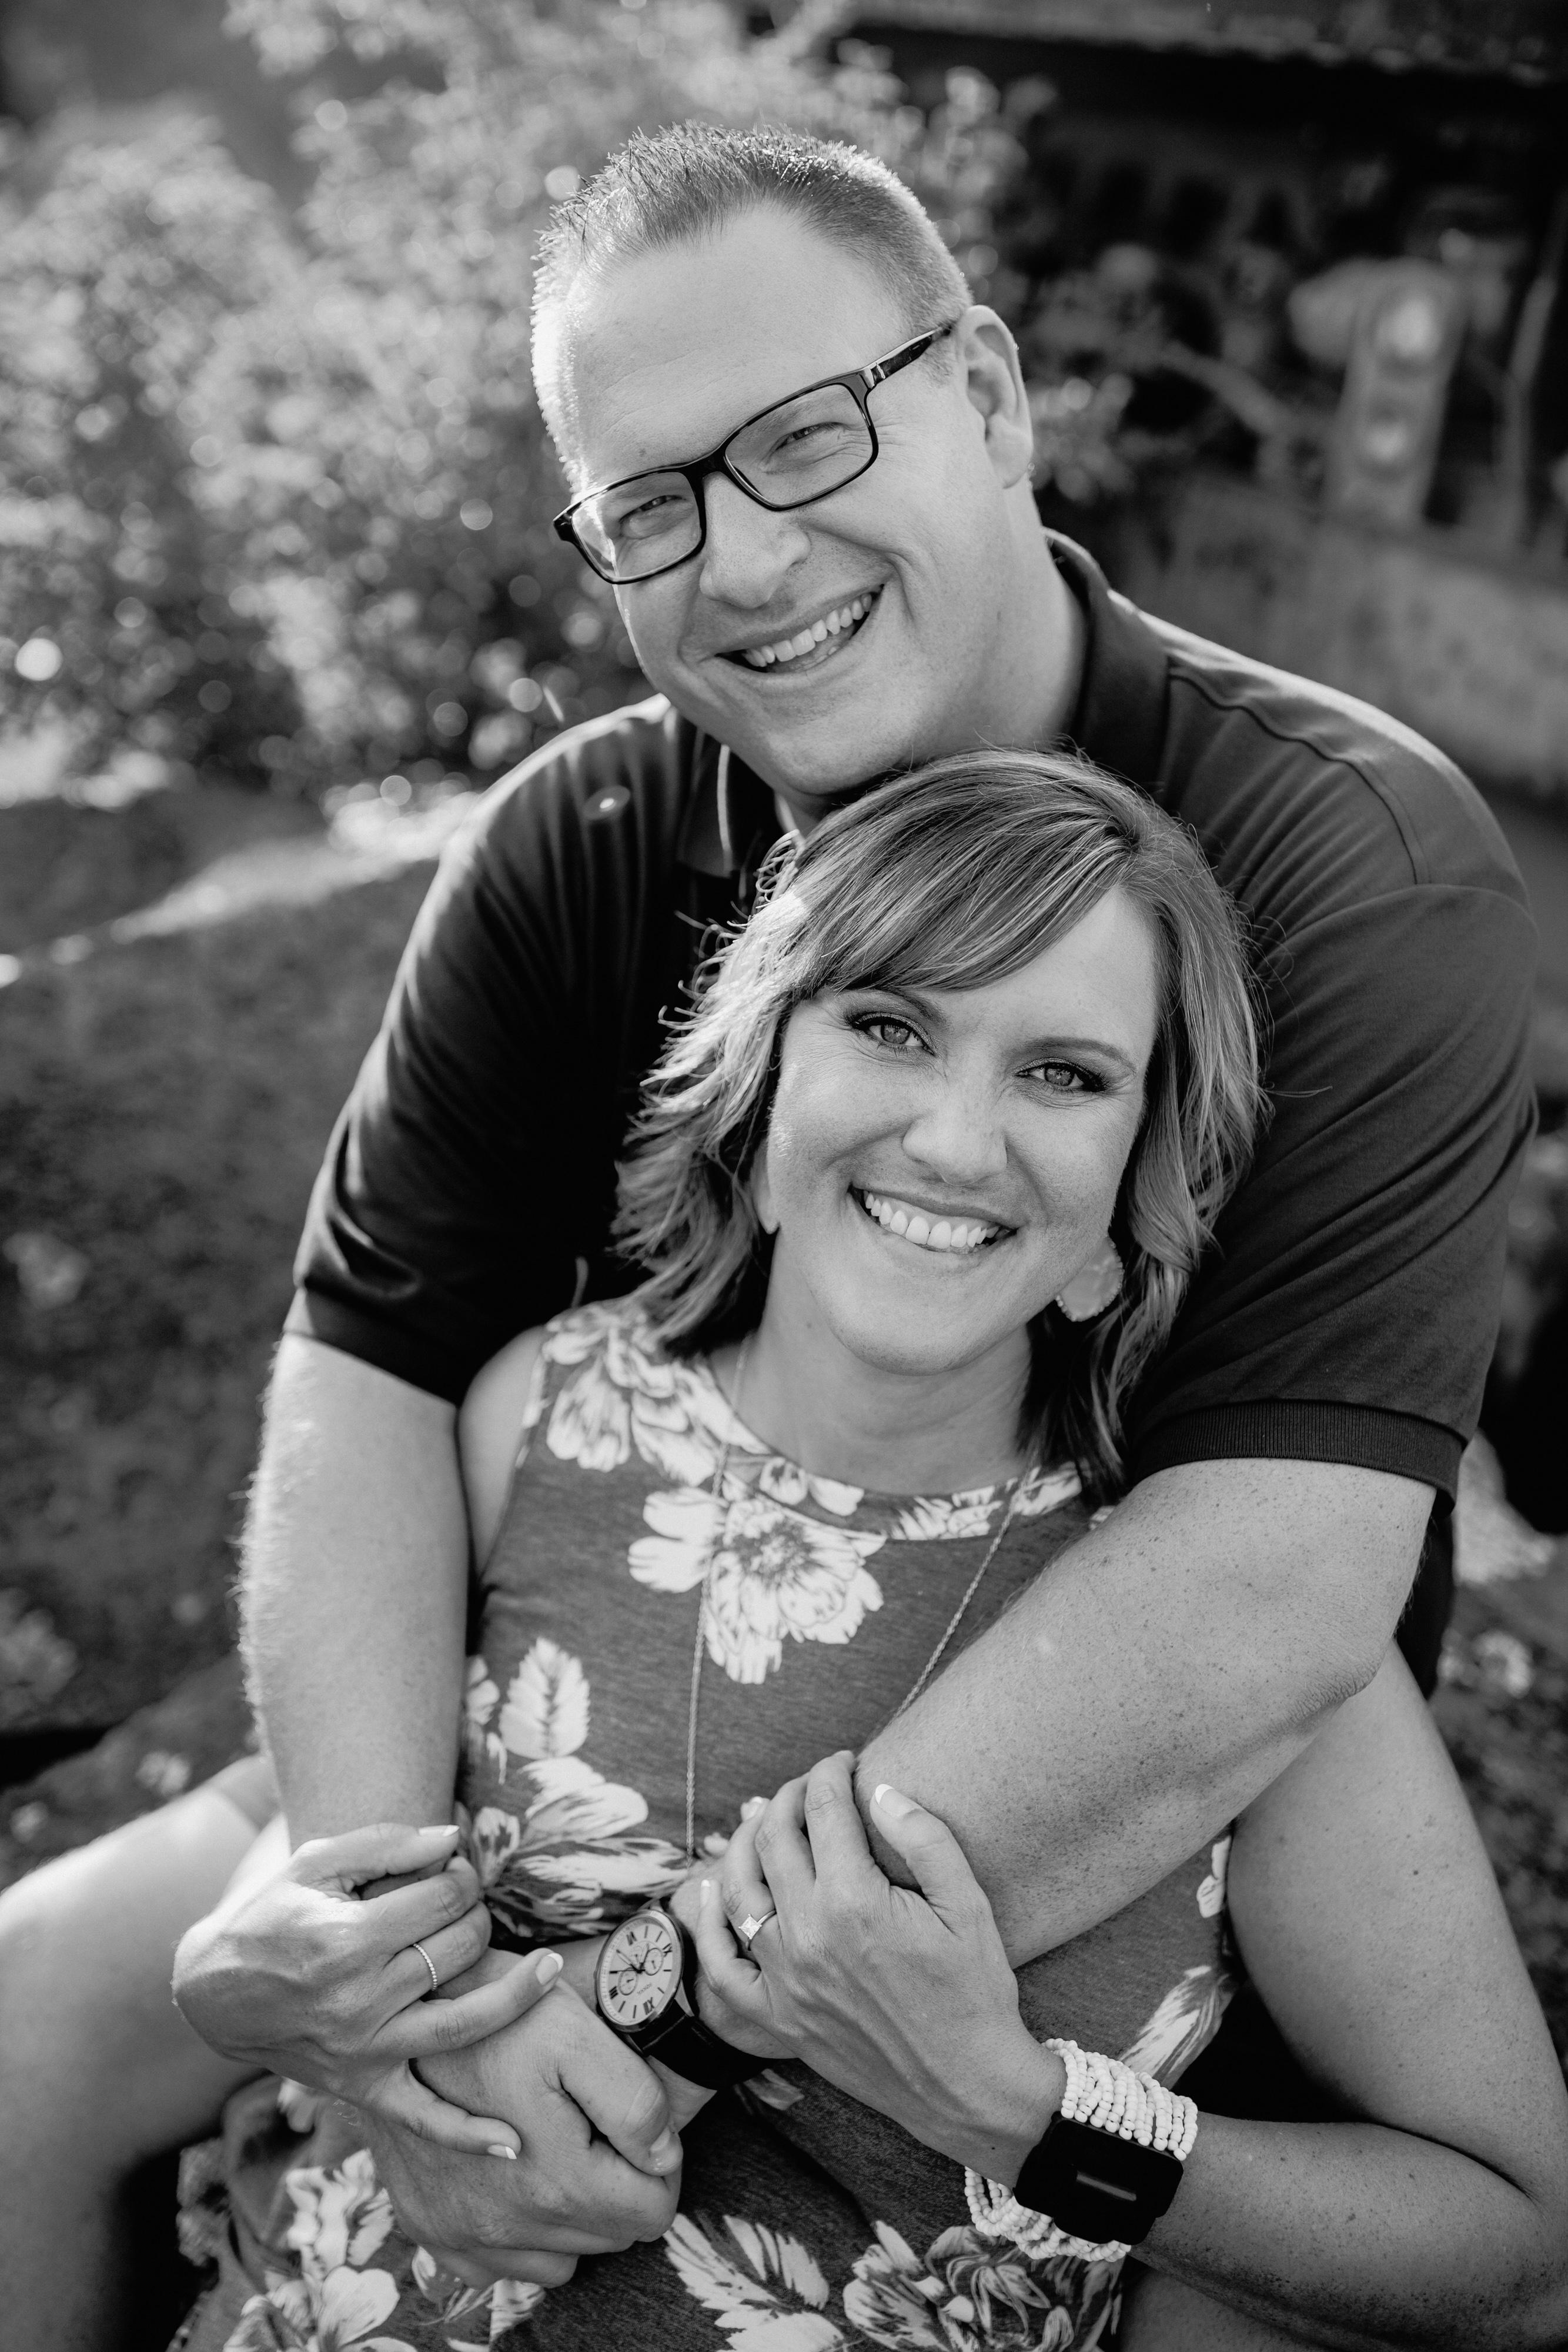 The Wedding Website of Hannah Brandes and Kevin Hermann